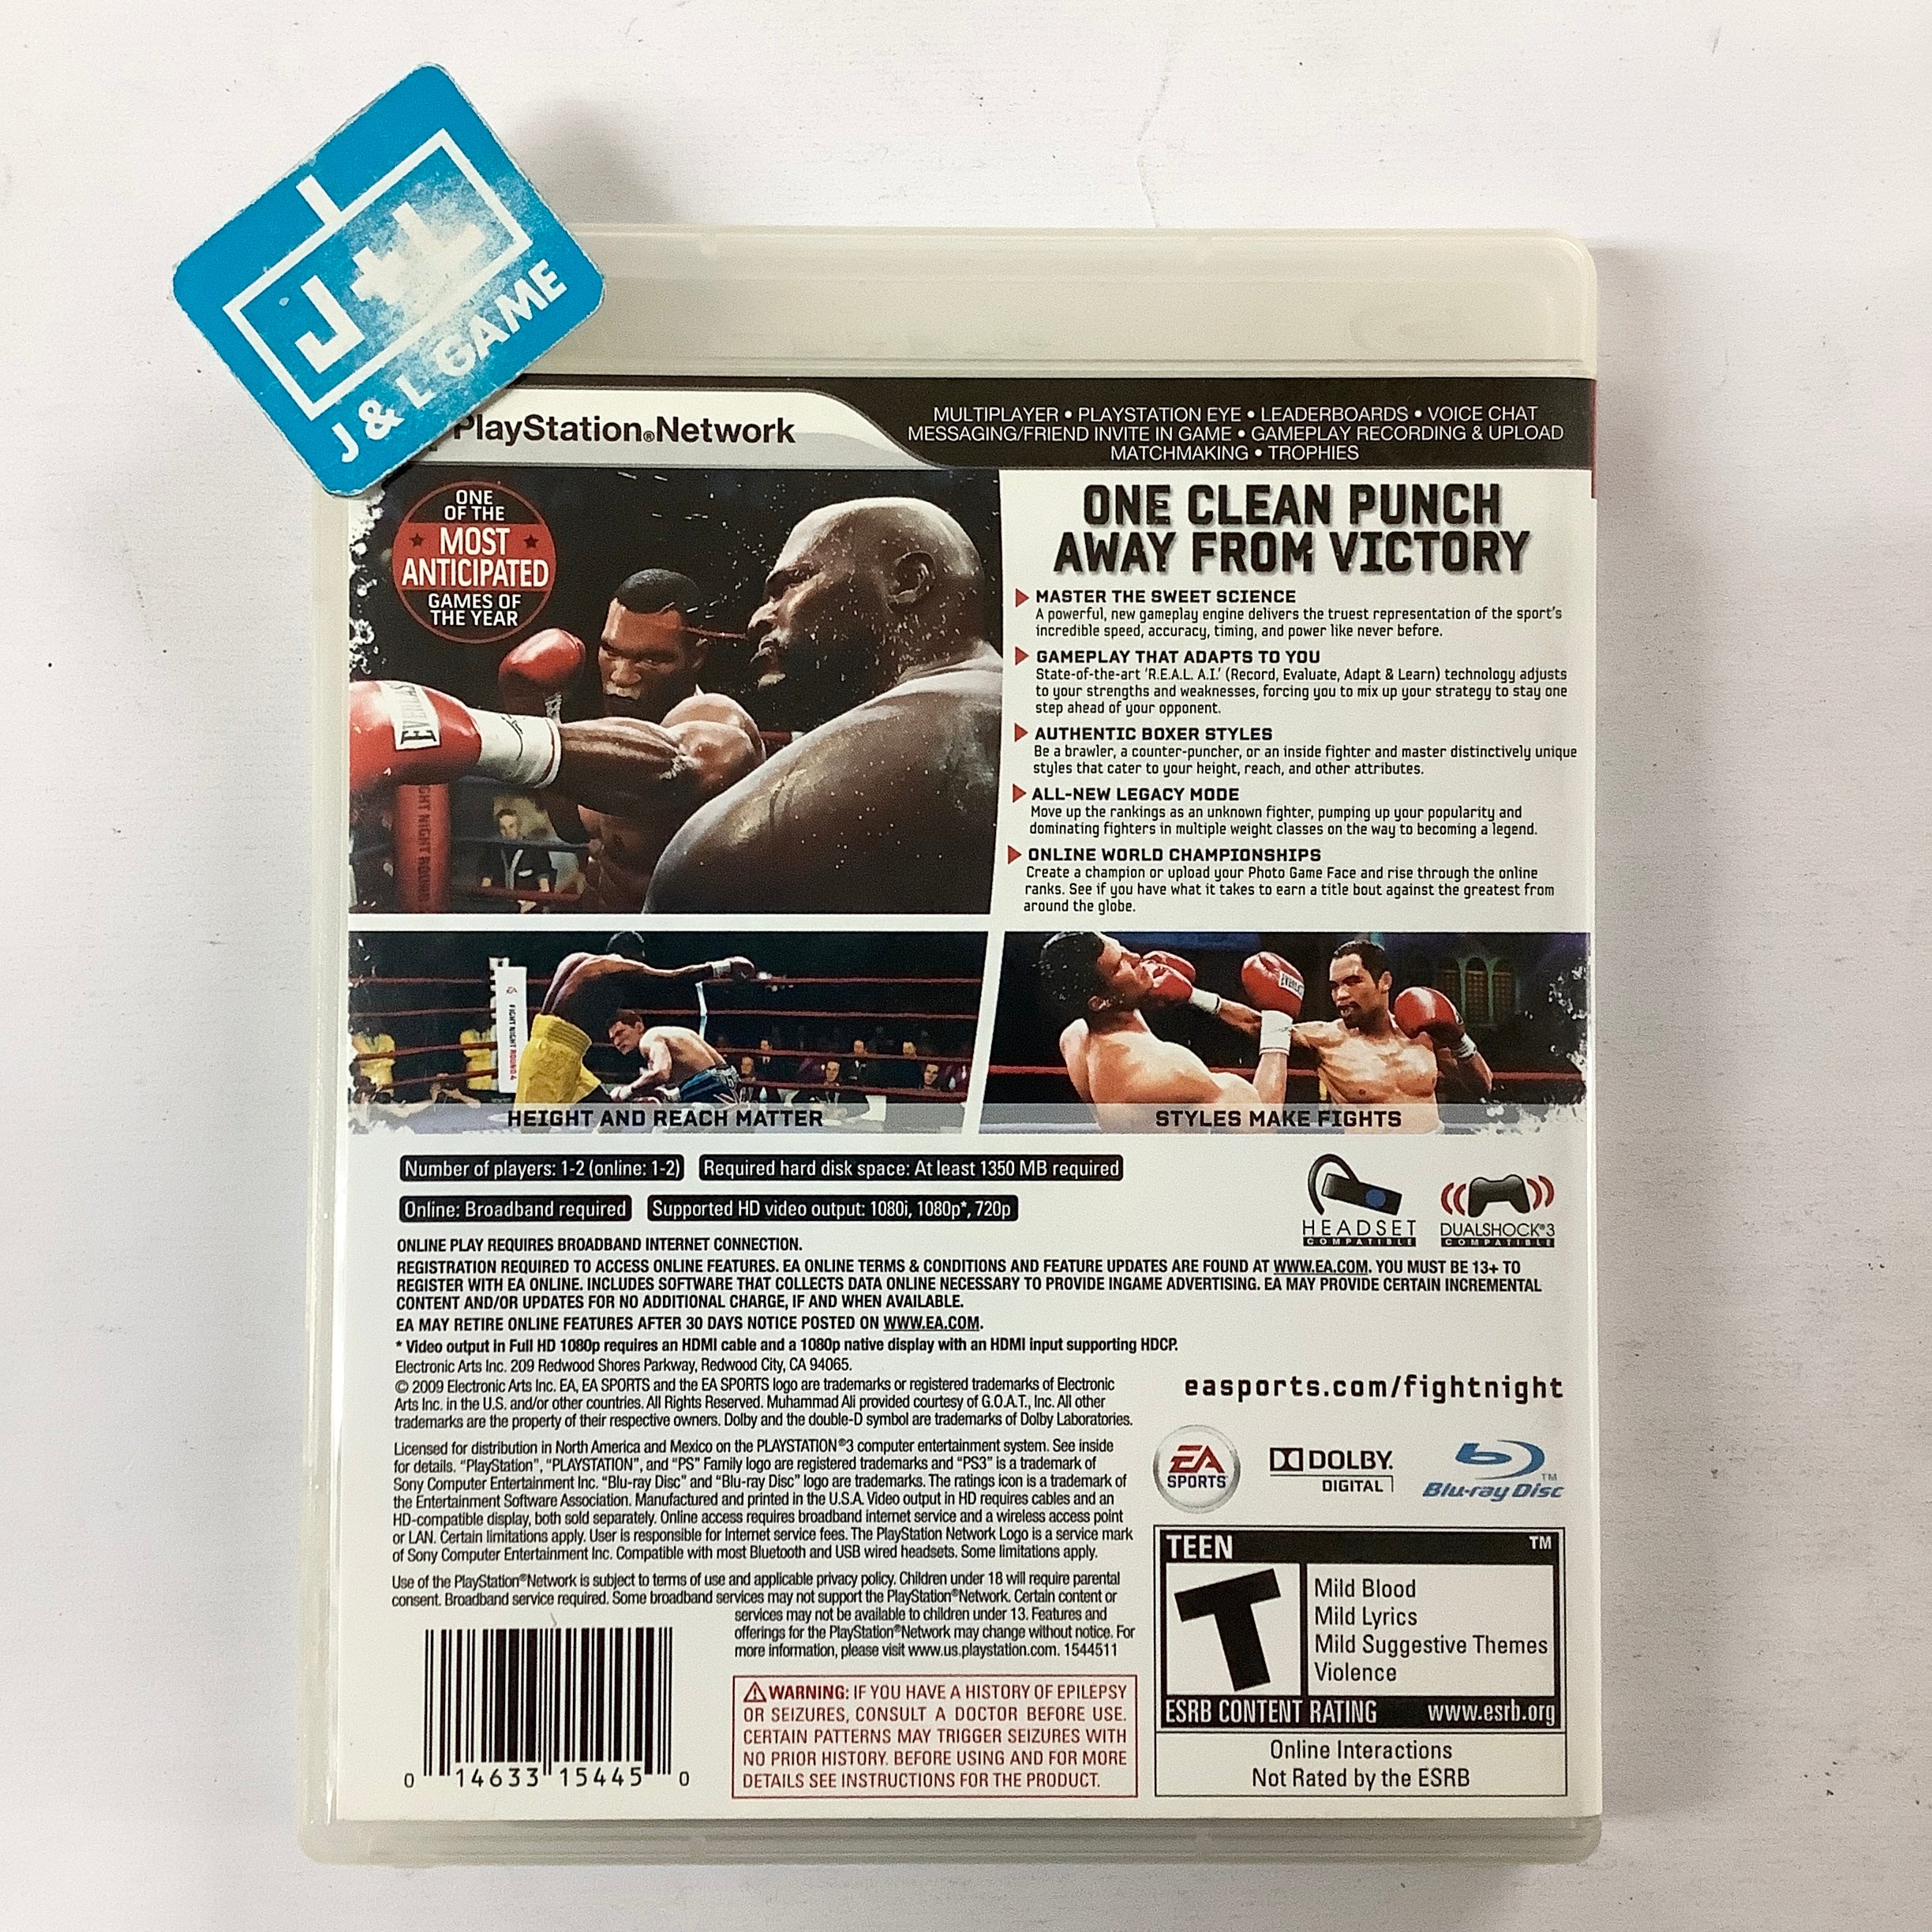 Fight Night Round 4 - (PS3) PlayStation 3 [Pre-Owned] Video Games EA Sports   